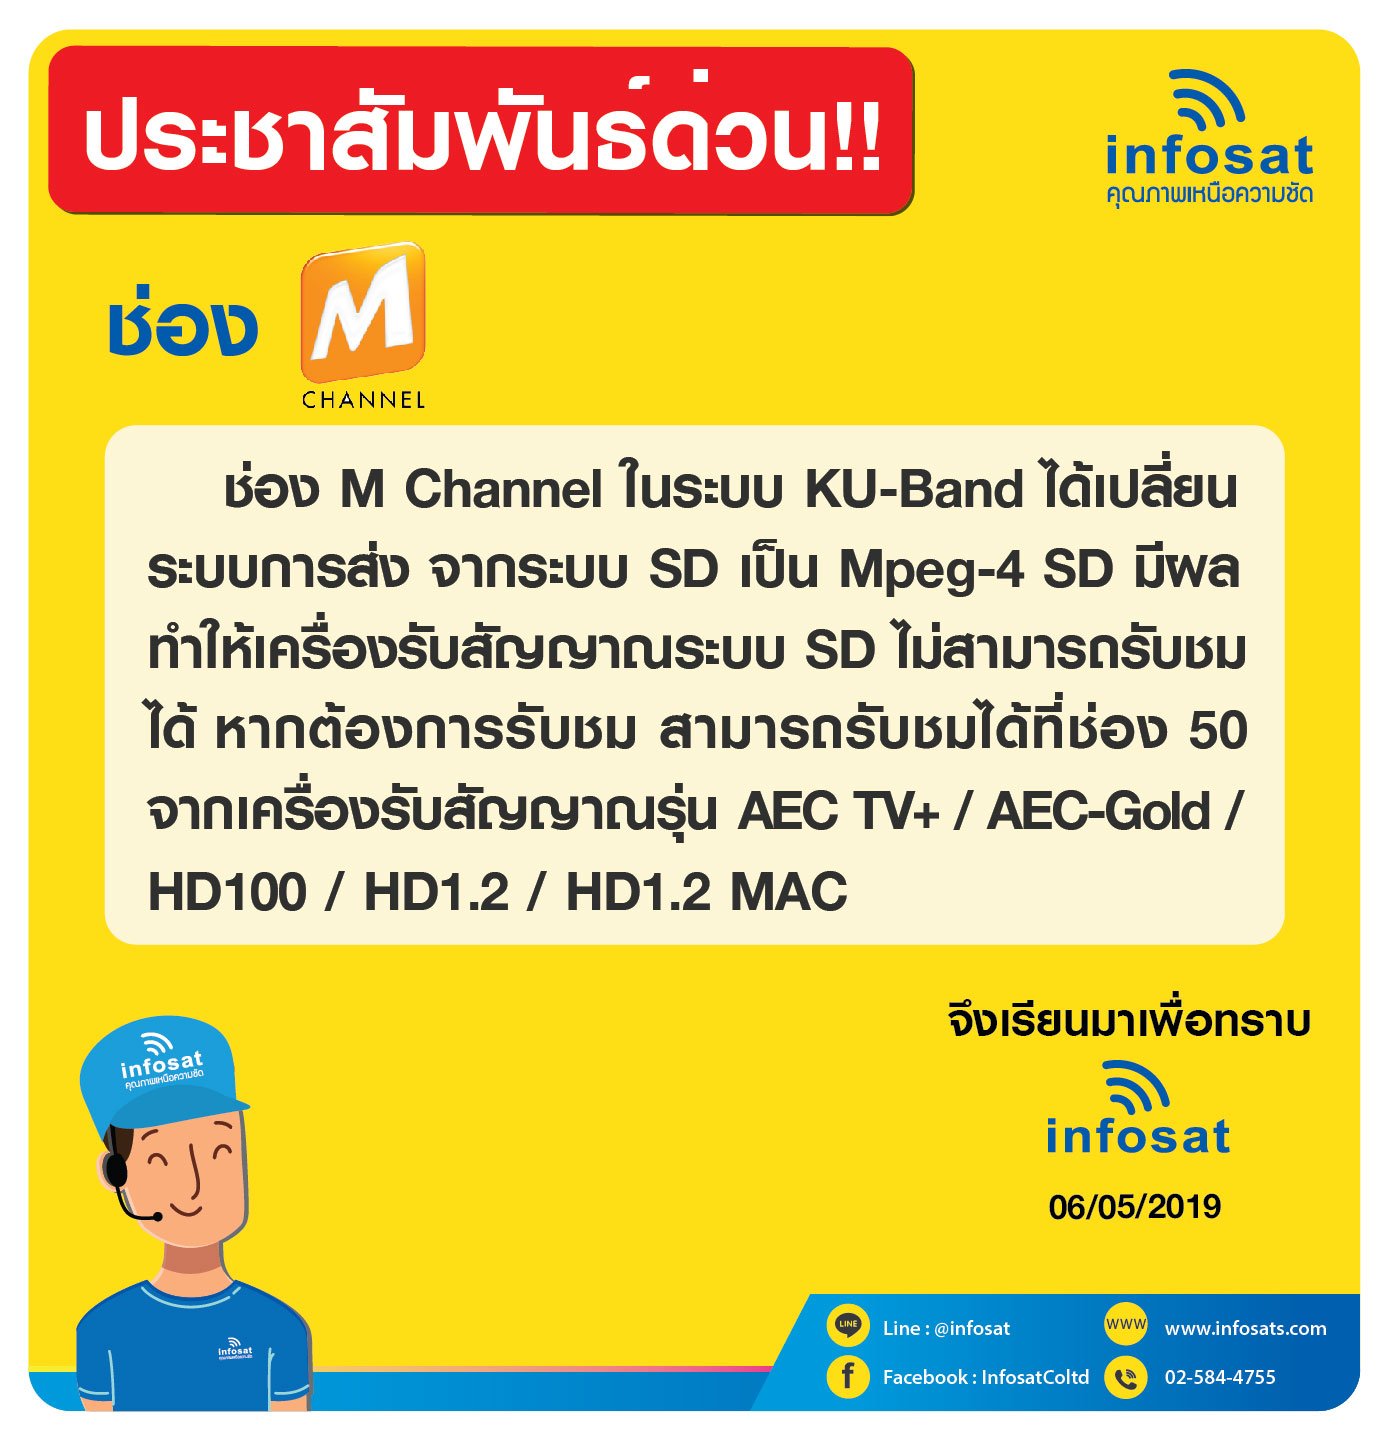 M Channel in KU-Band system has changed the transmission system from SD to Mpeg-4 SD